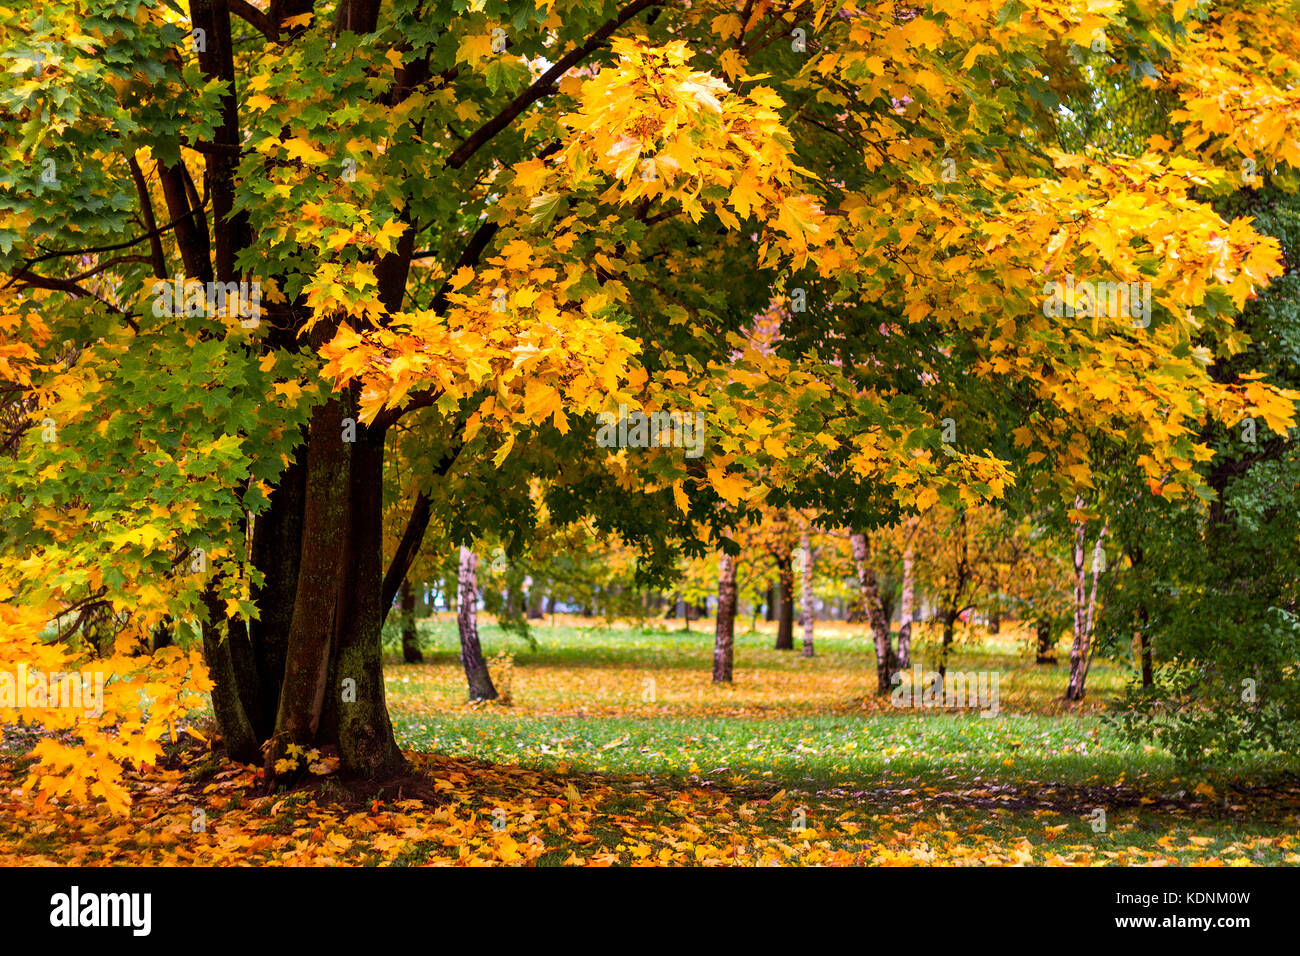 Maple and birch trees in a park by an autumn day with yellow, green and red leaves and grass covered by foliage. Stock Photo